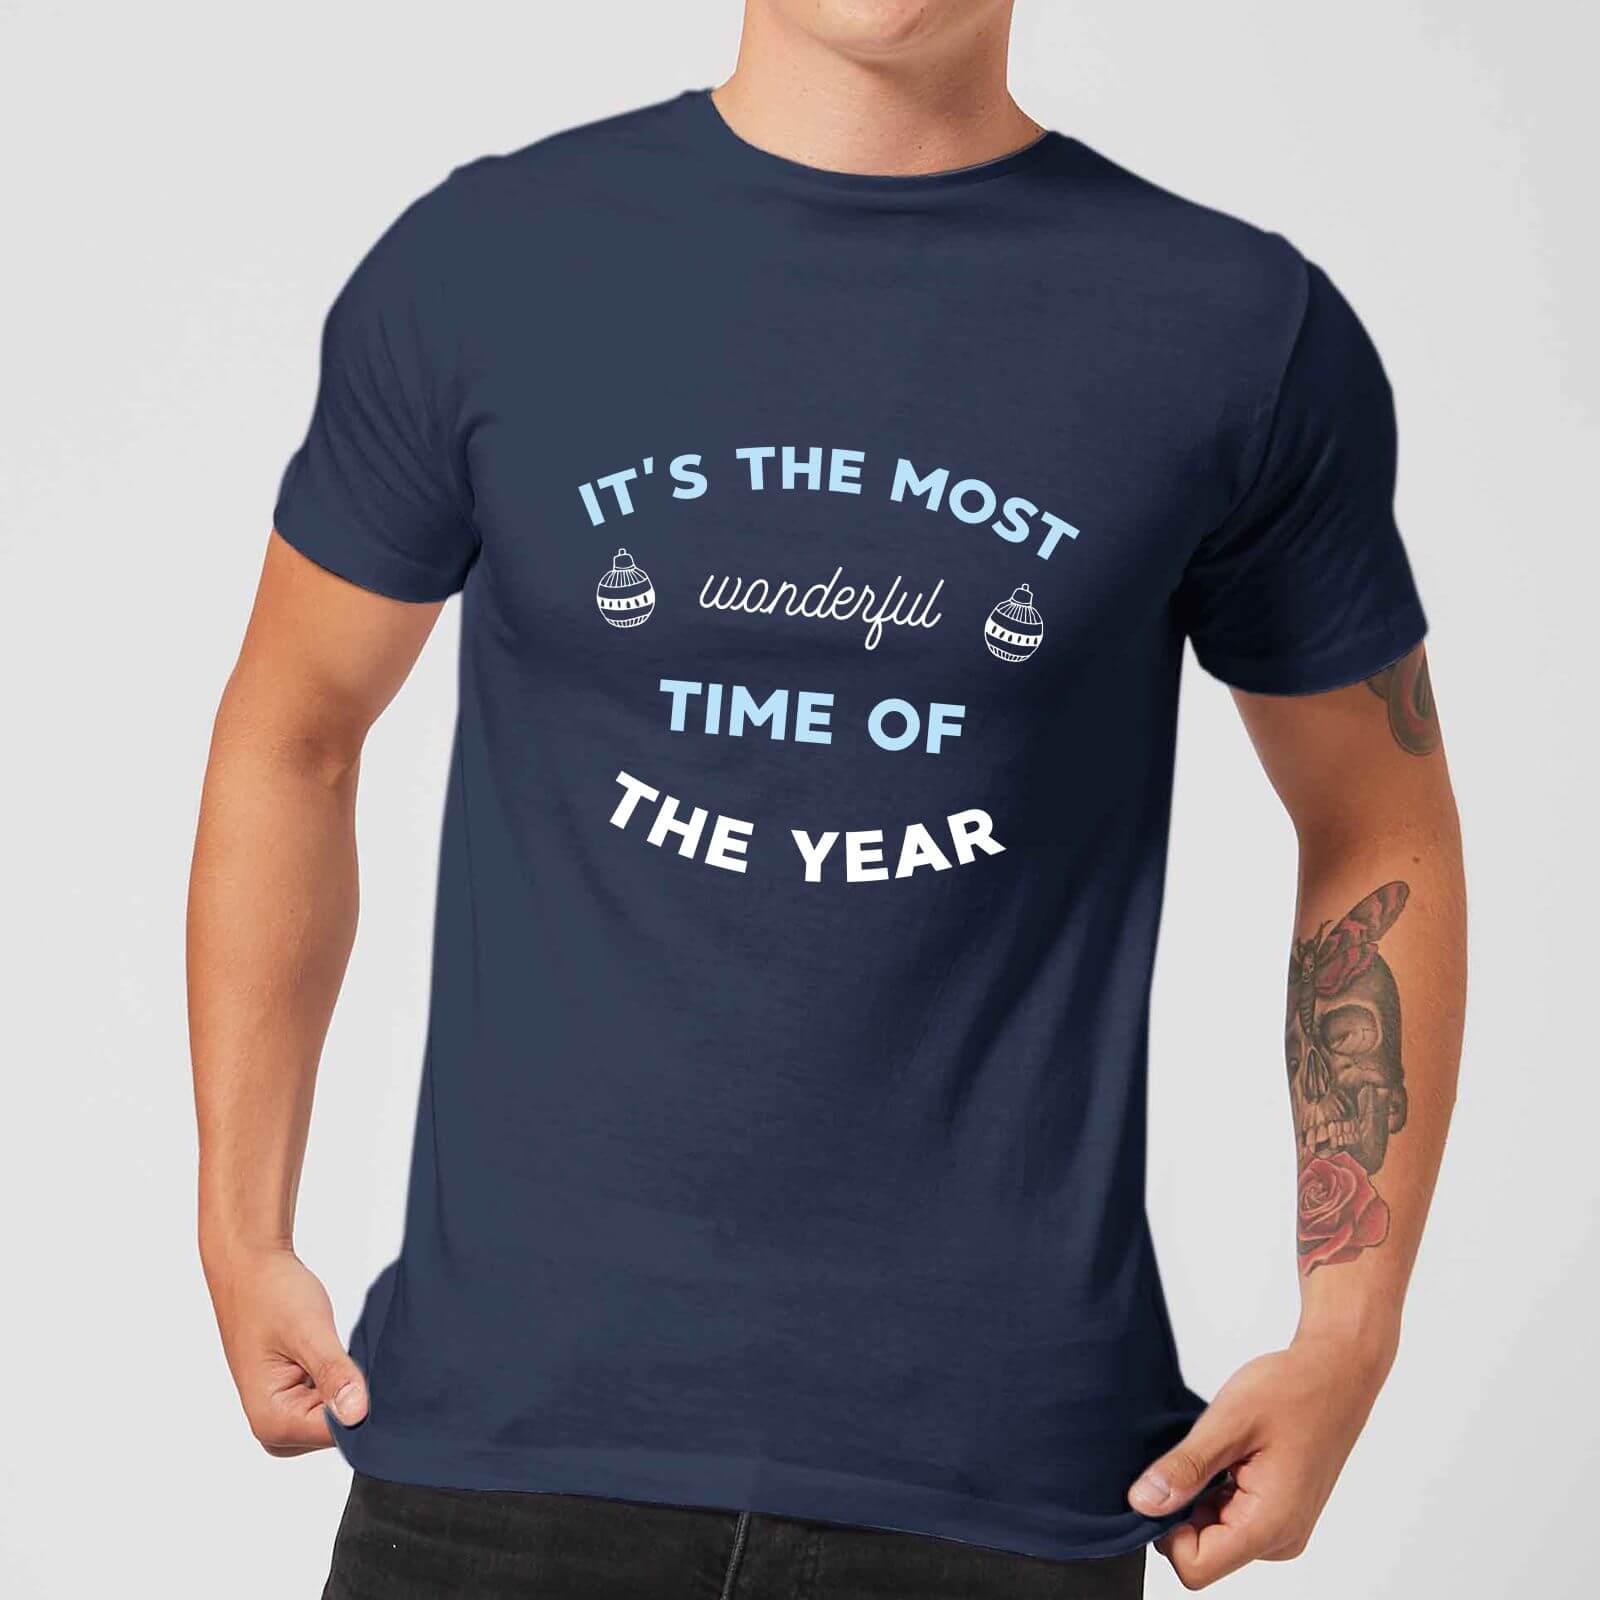 It's The Most Wonderful Time Of The Year Men's Christmas T-Shirt - Navy - XL - Navy